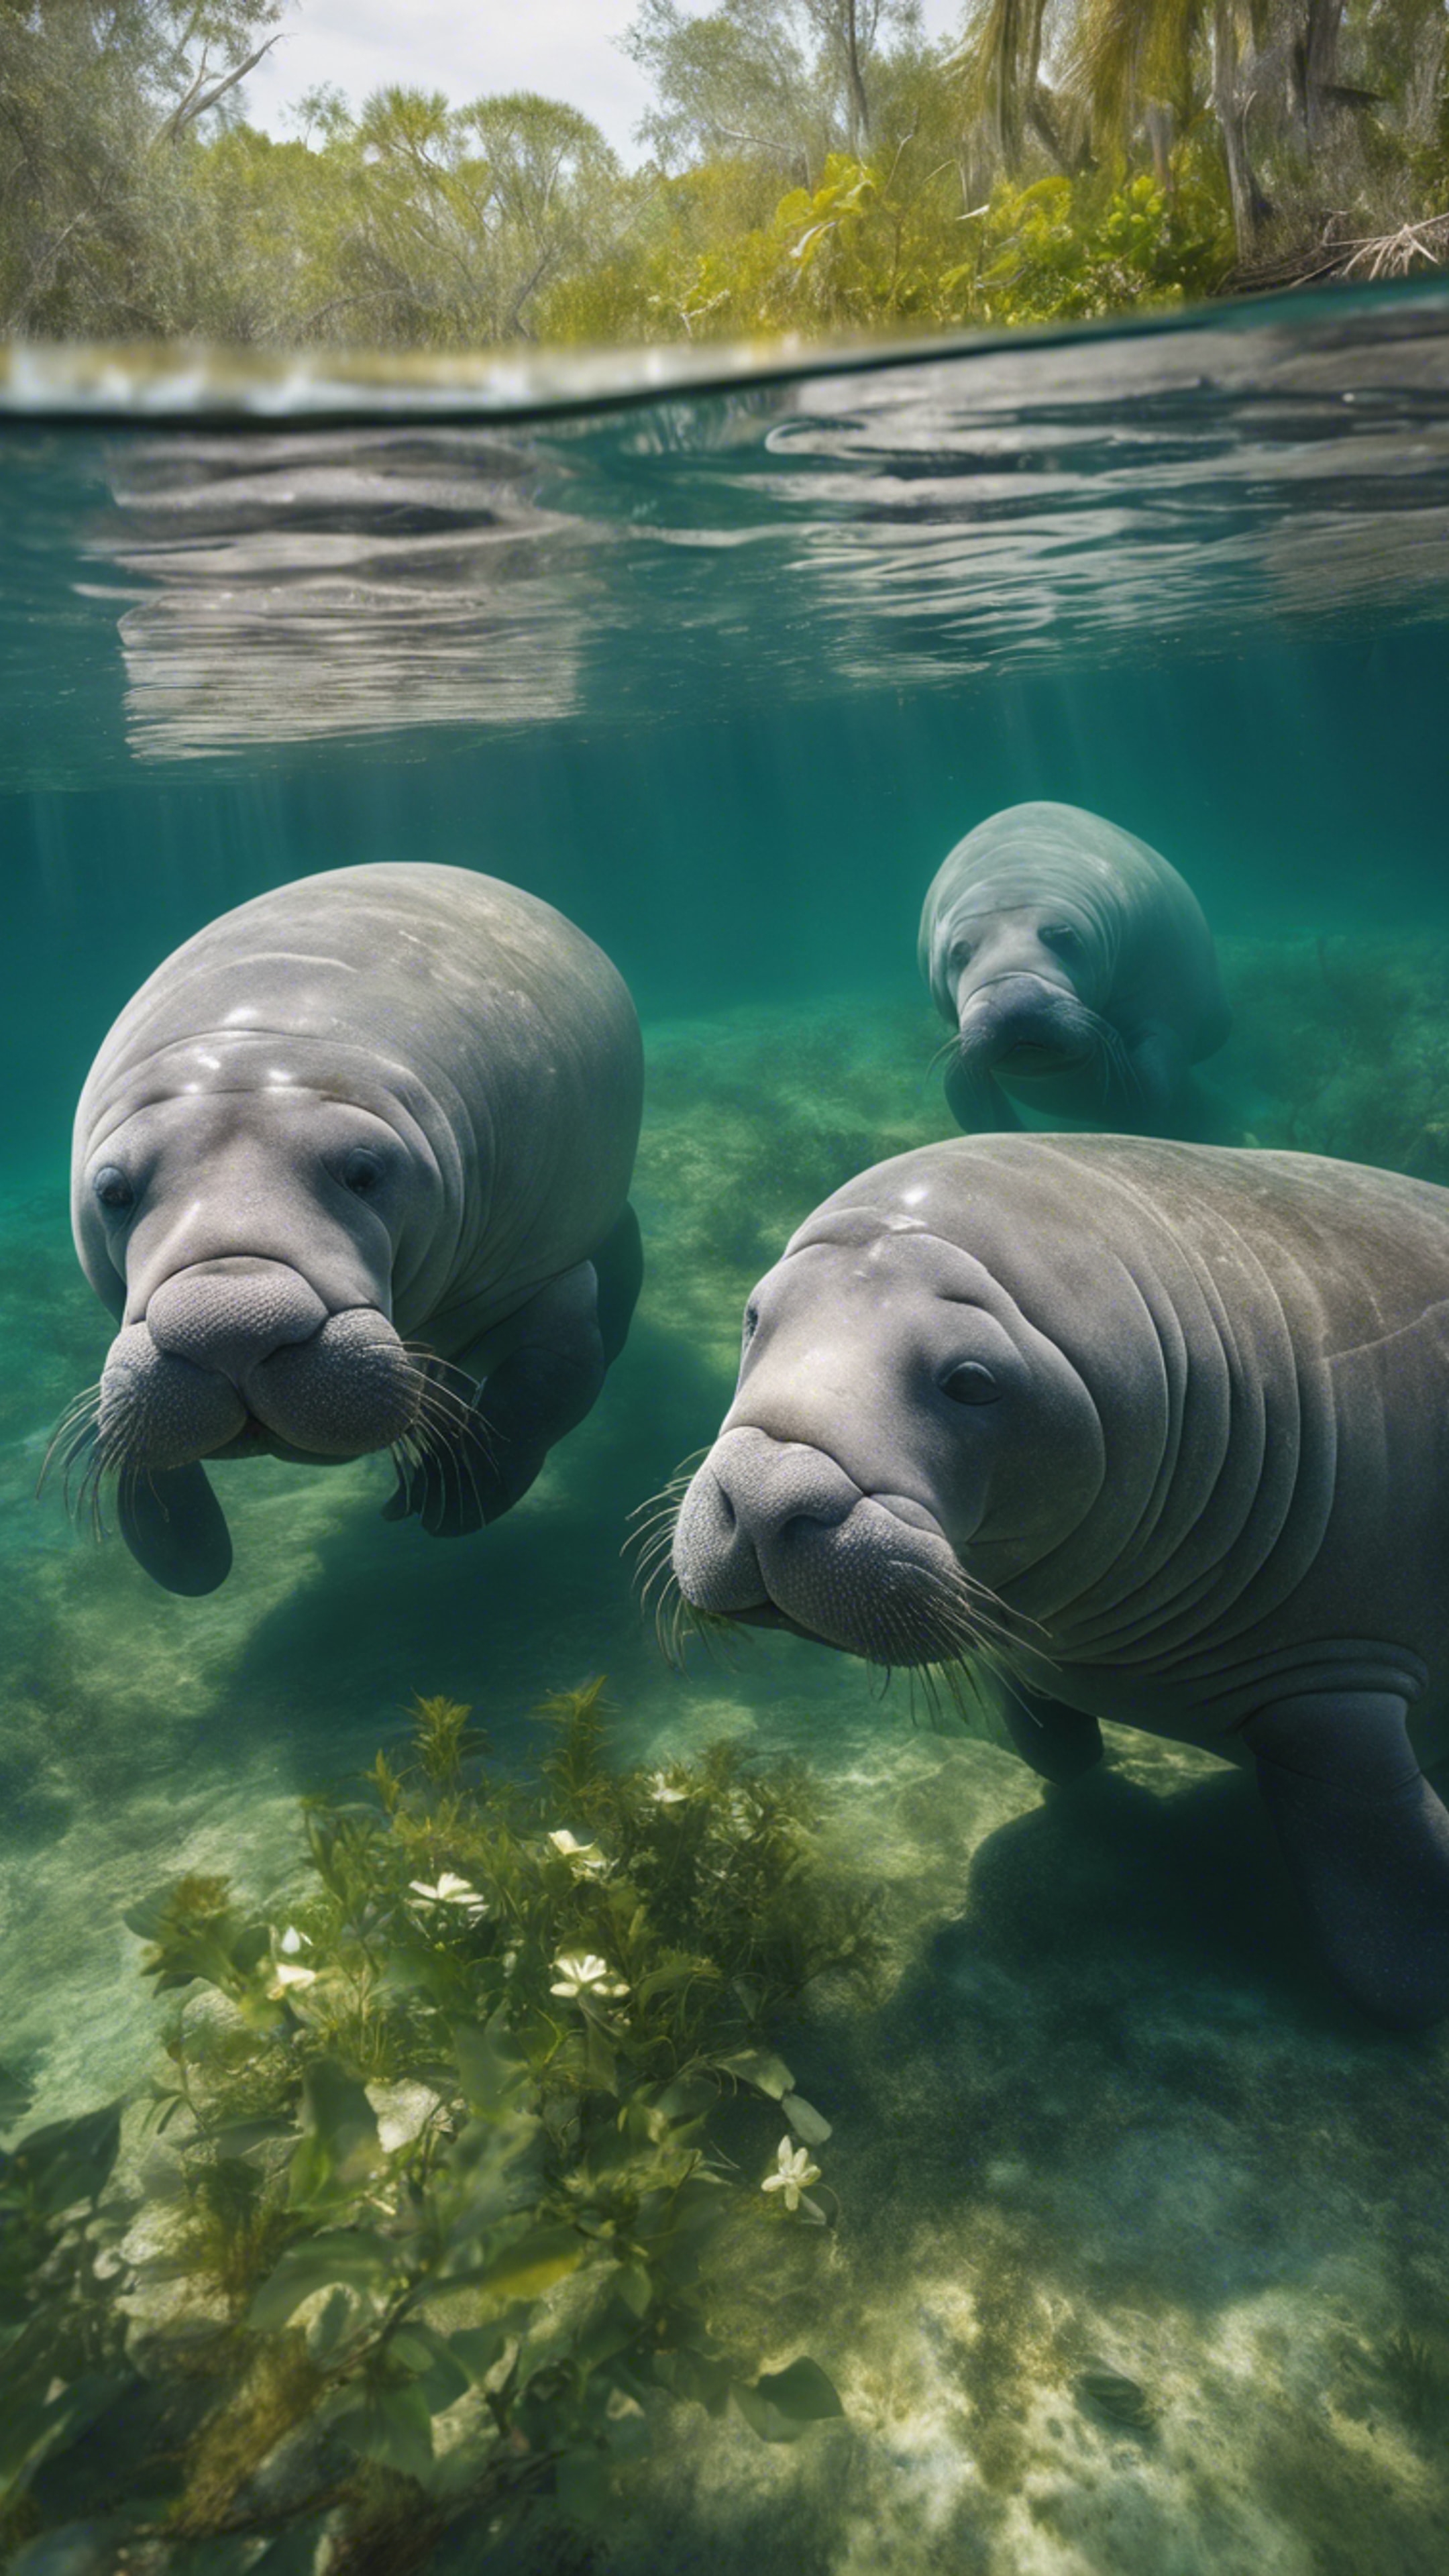 A group of manatees gathering in a crystal clear spring in Northern Florida, with light filtering through the water.壁紙[11e0c5c39072420c89d2]